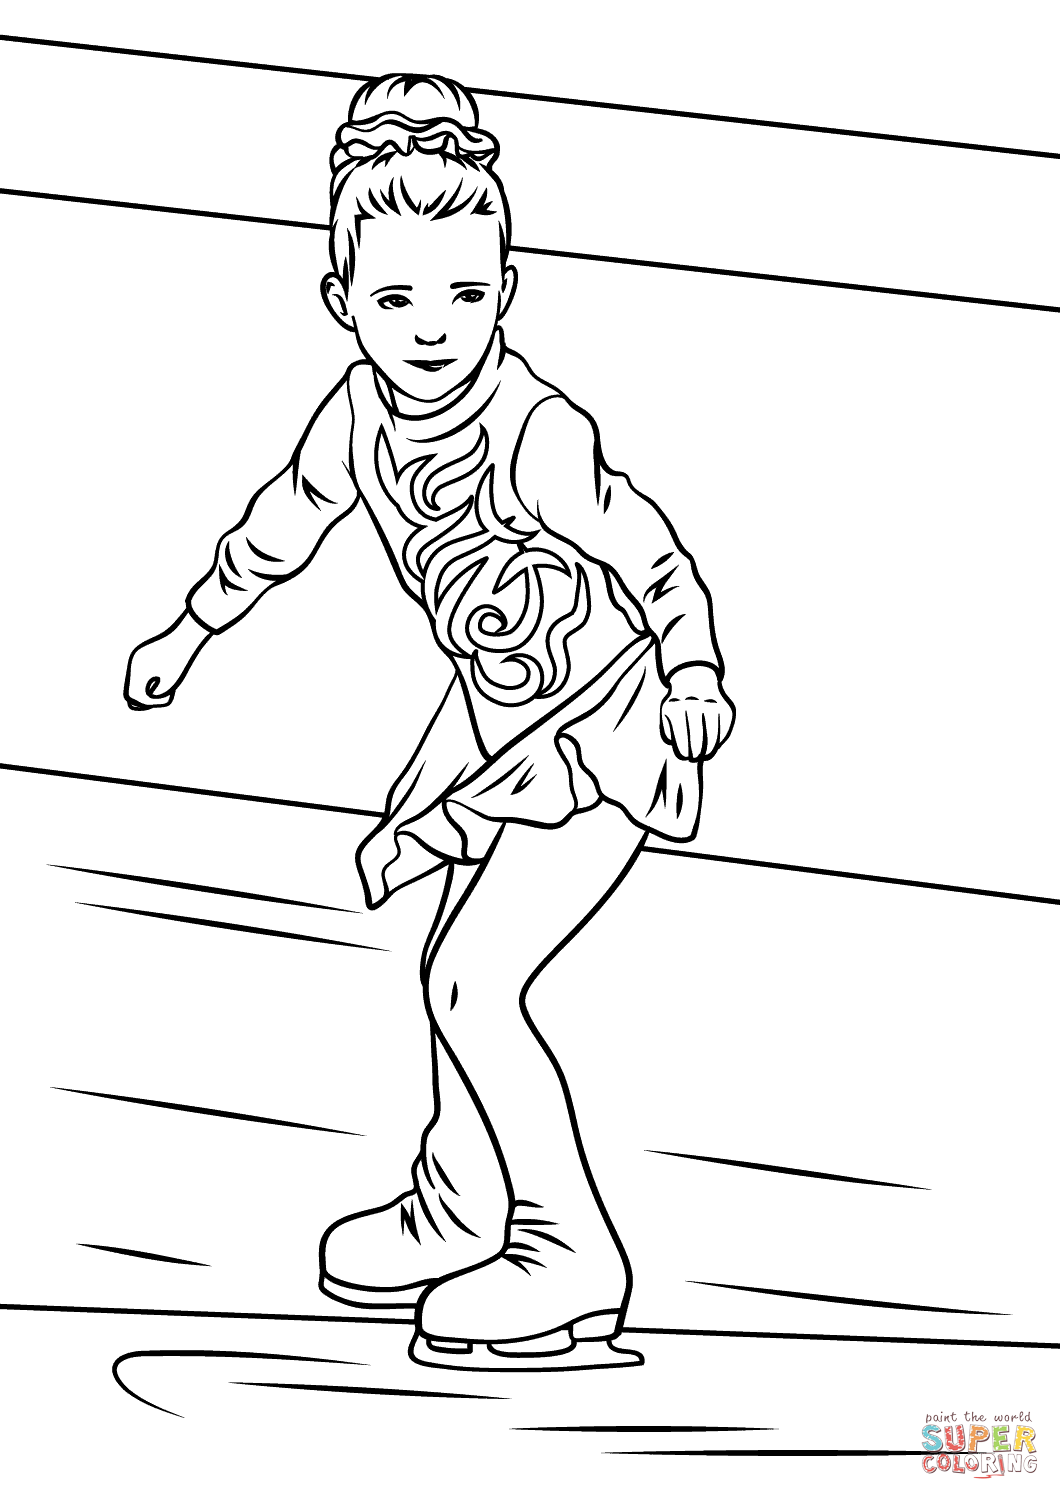 Roller Skate Coloring Page at GetColorings.com | Free printable